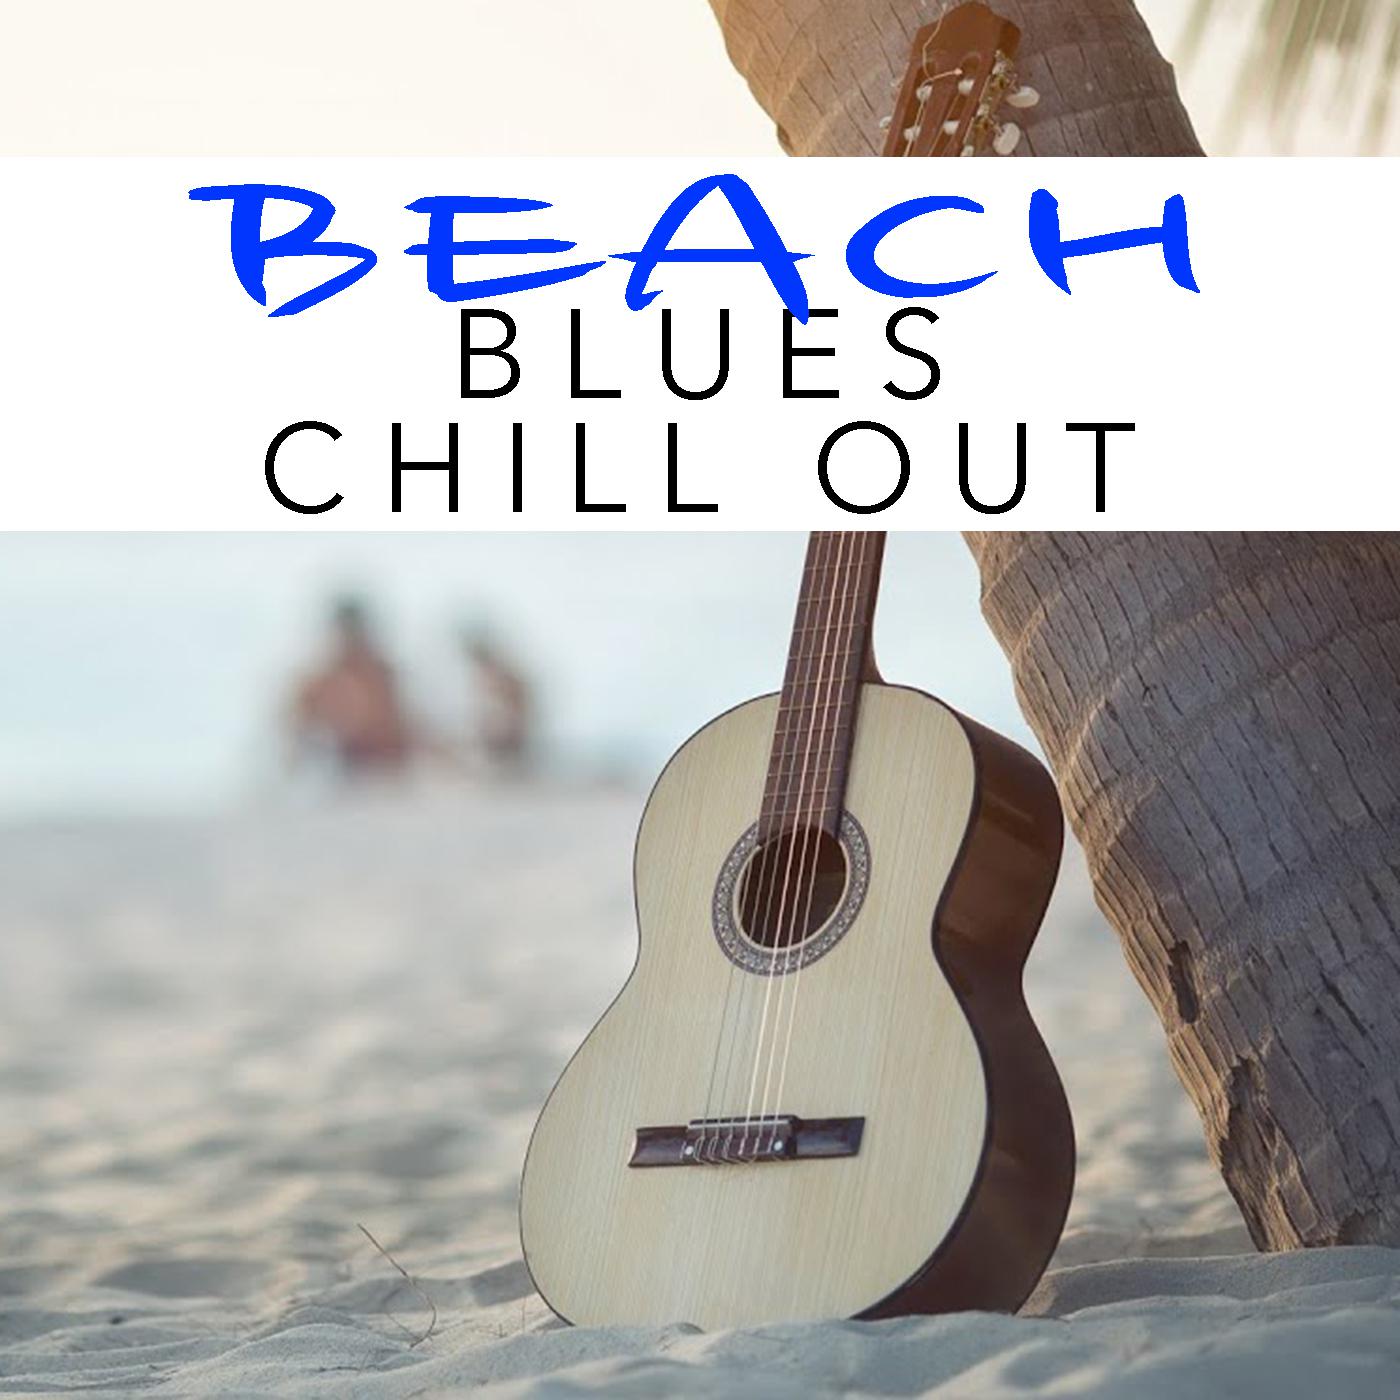 Beach Blues Chill Out